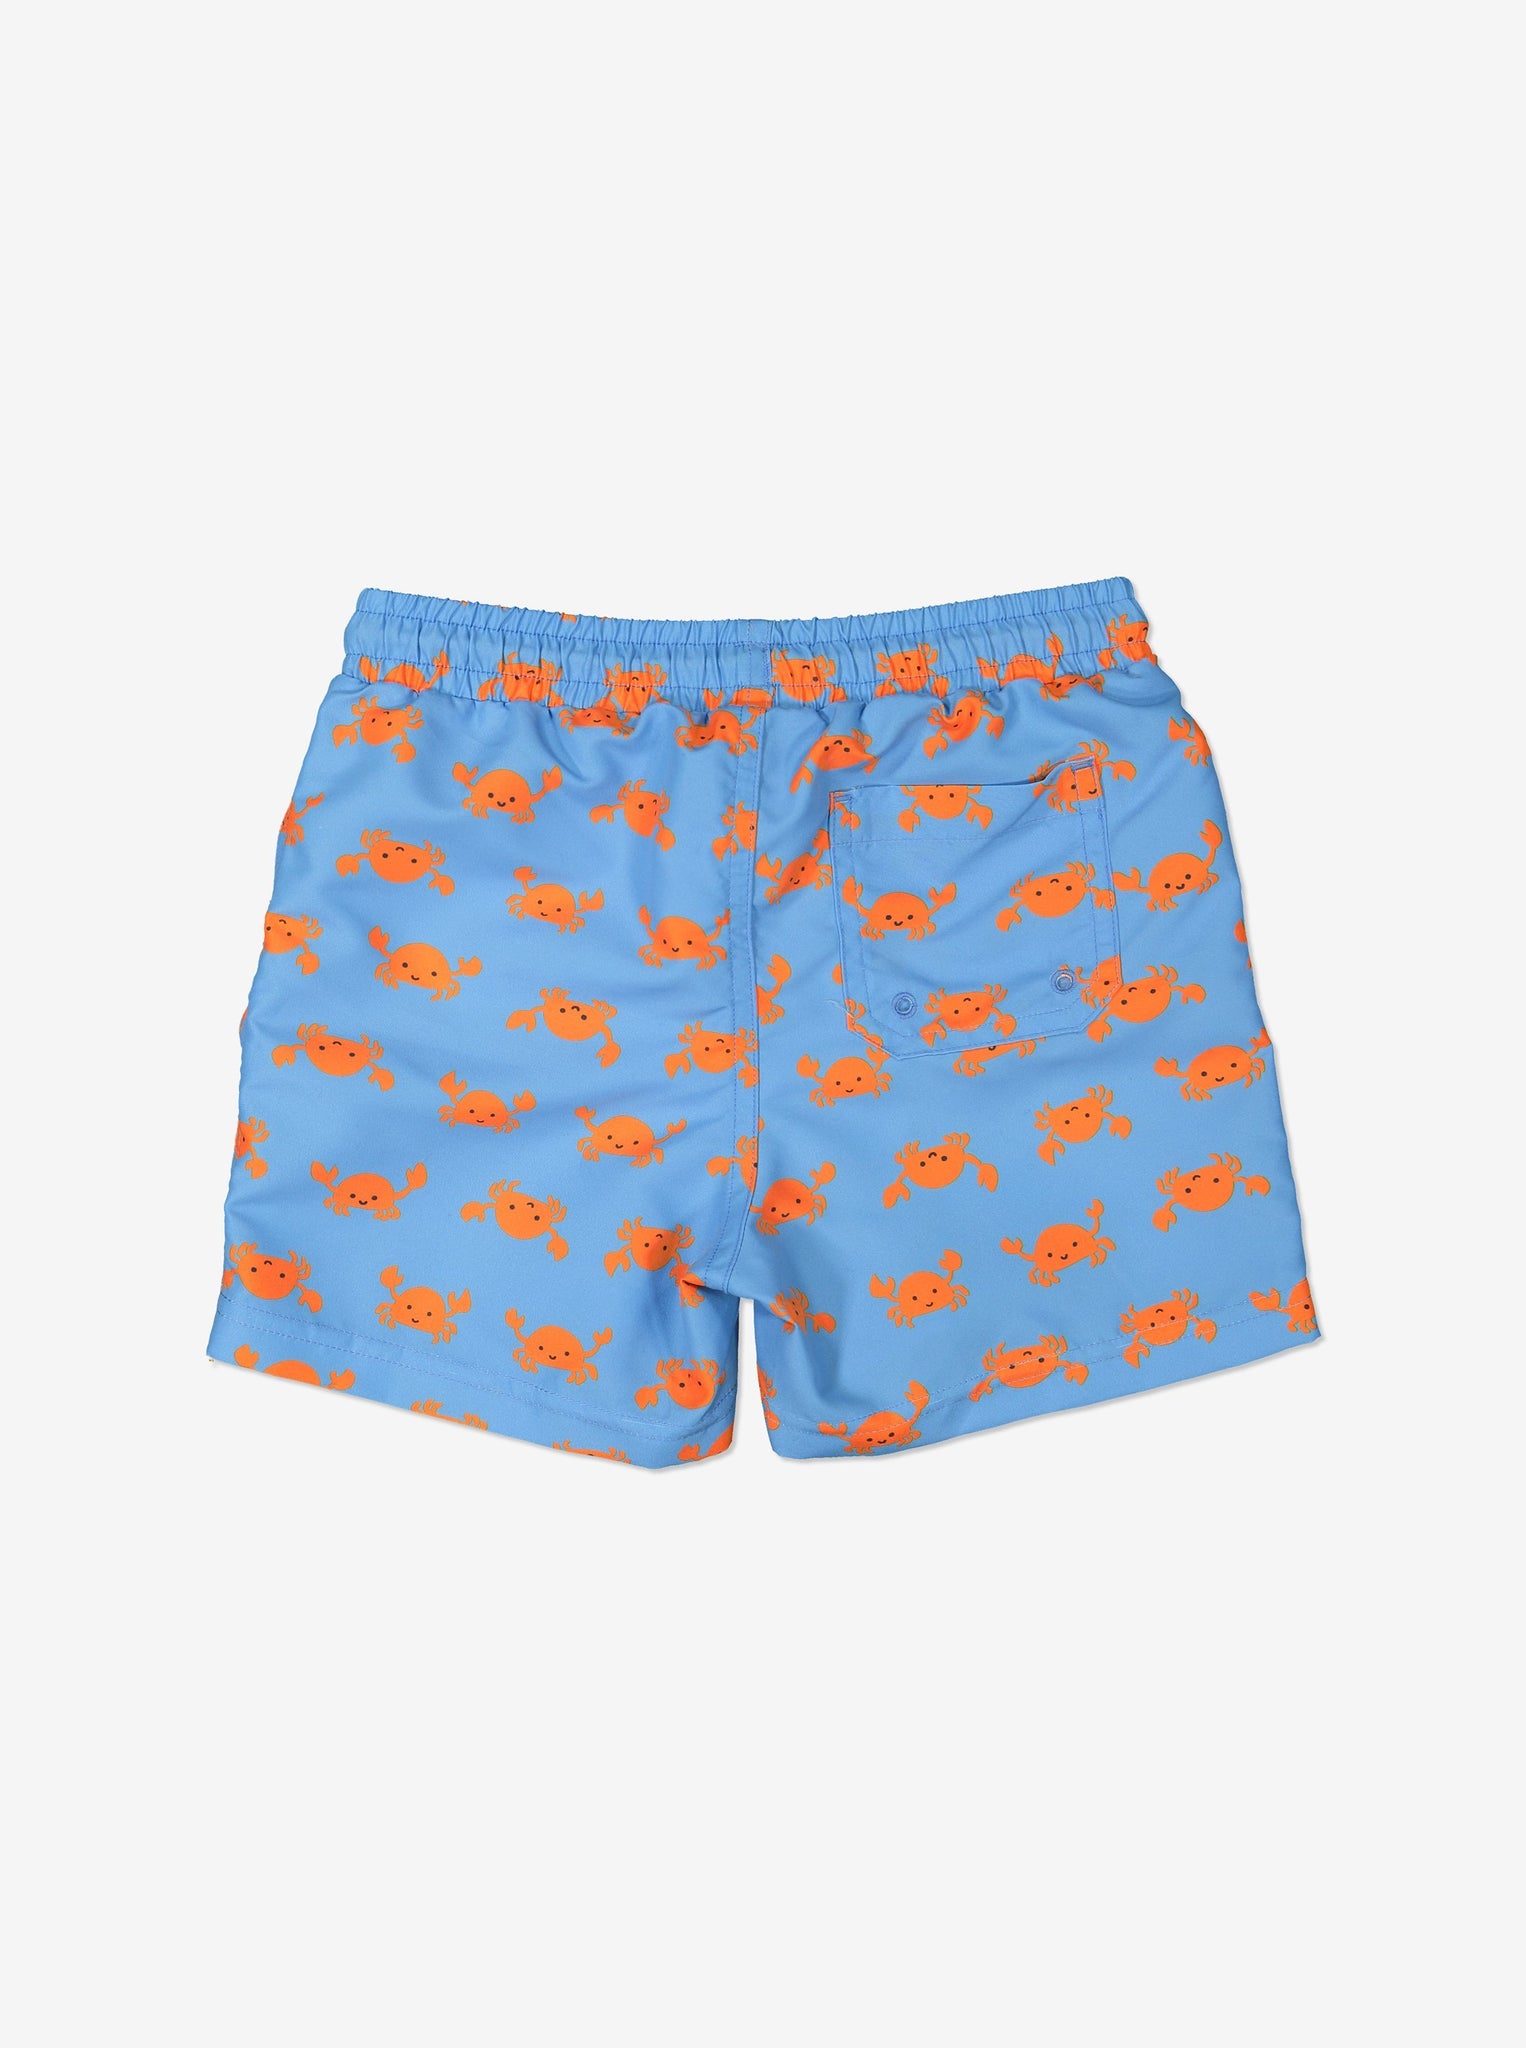 Blue kids swim shorts printed with small orange crabs. Features an inner mesh lining and adjustable drawstring waist.